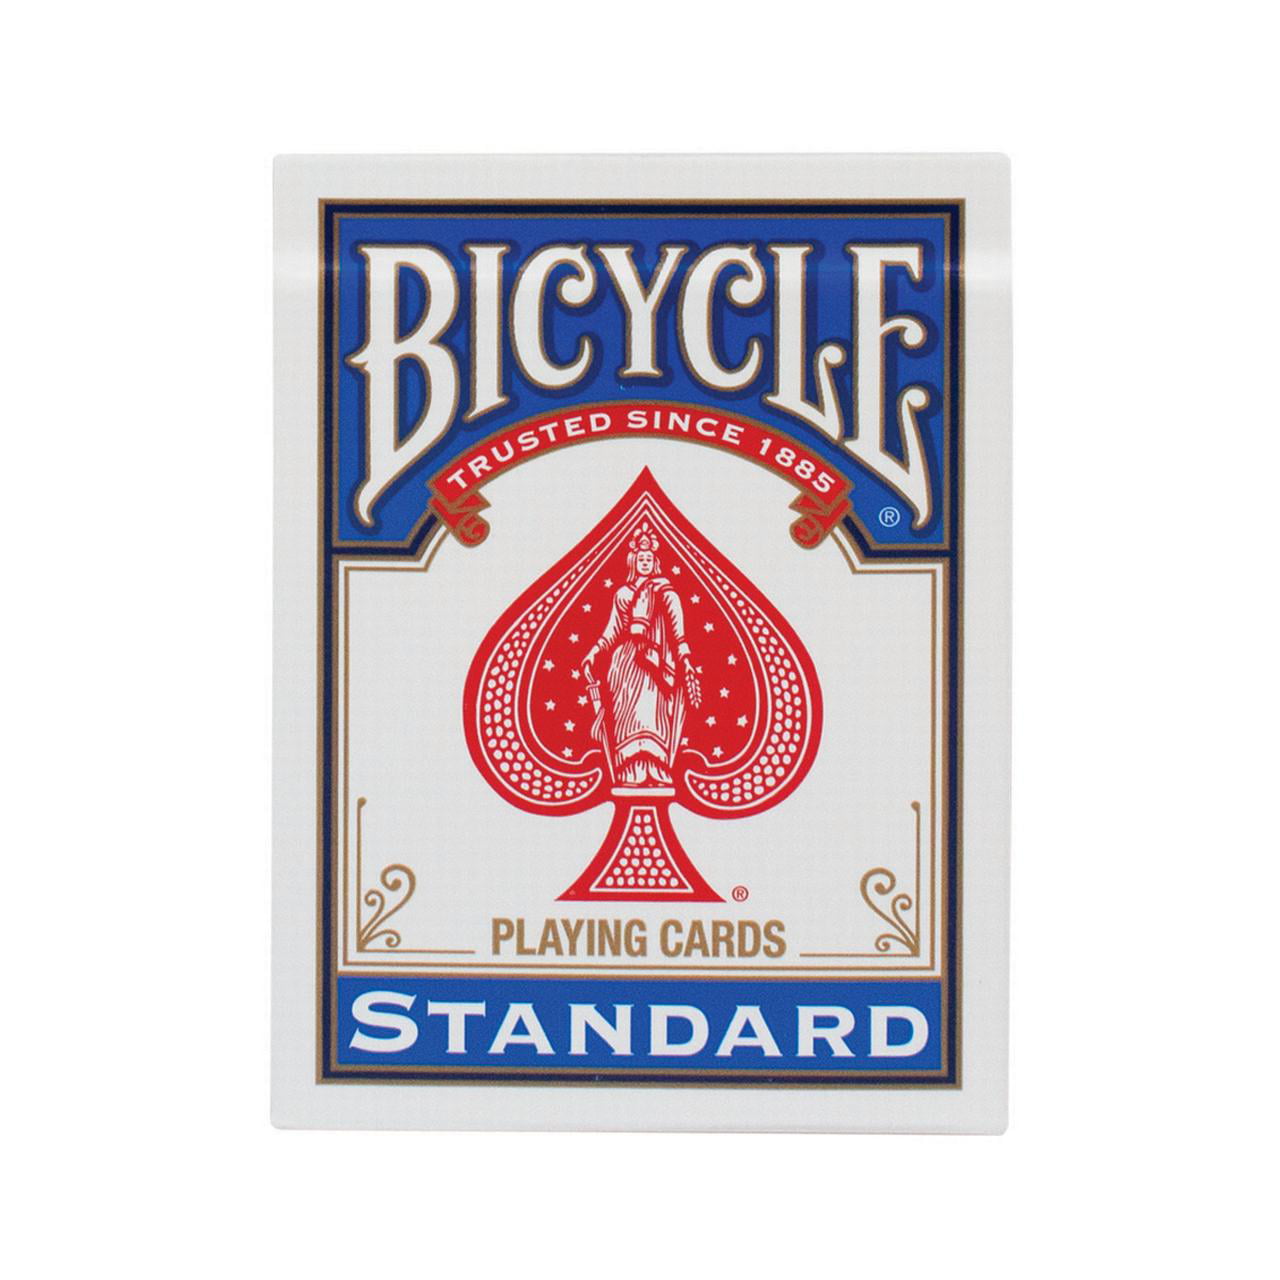  Bicycle Standard UV Marked Playing Cards - Poker Cheating Devices